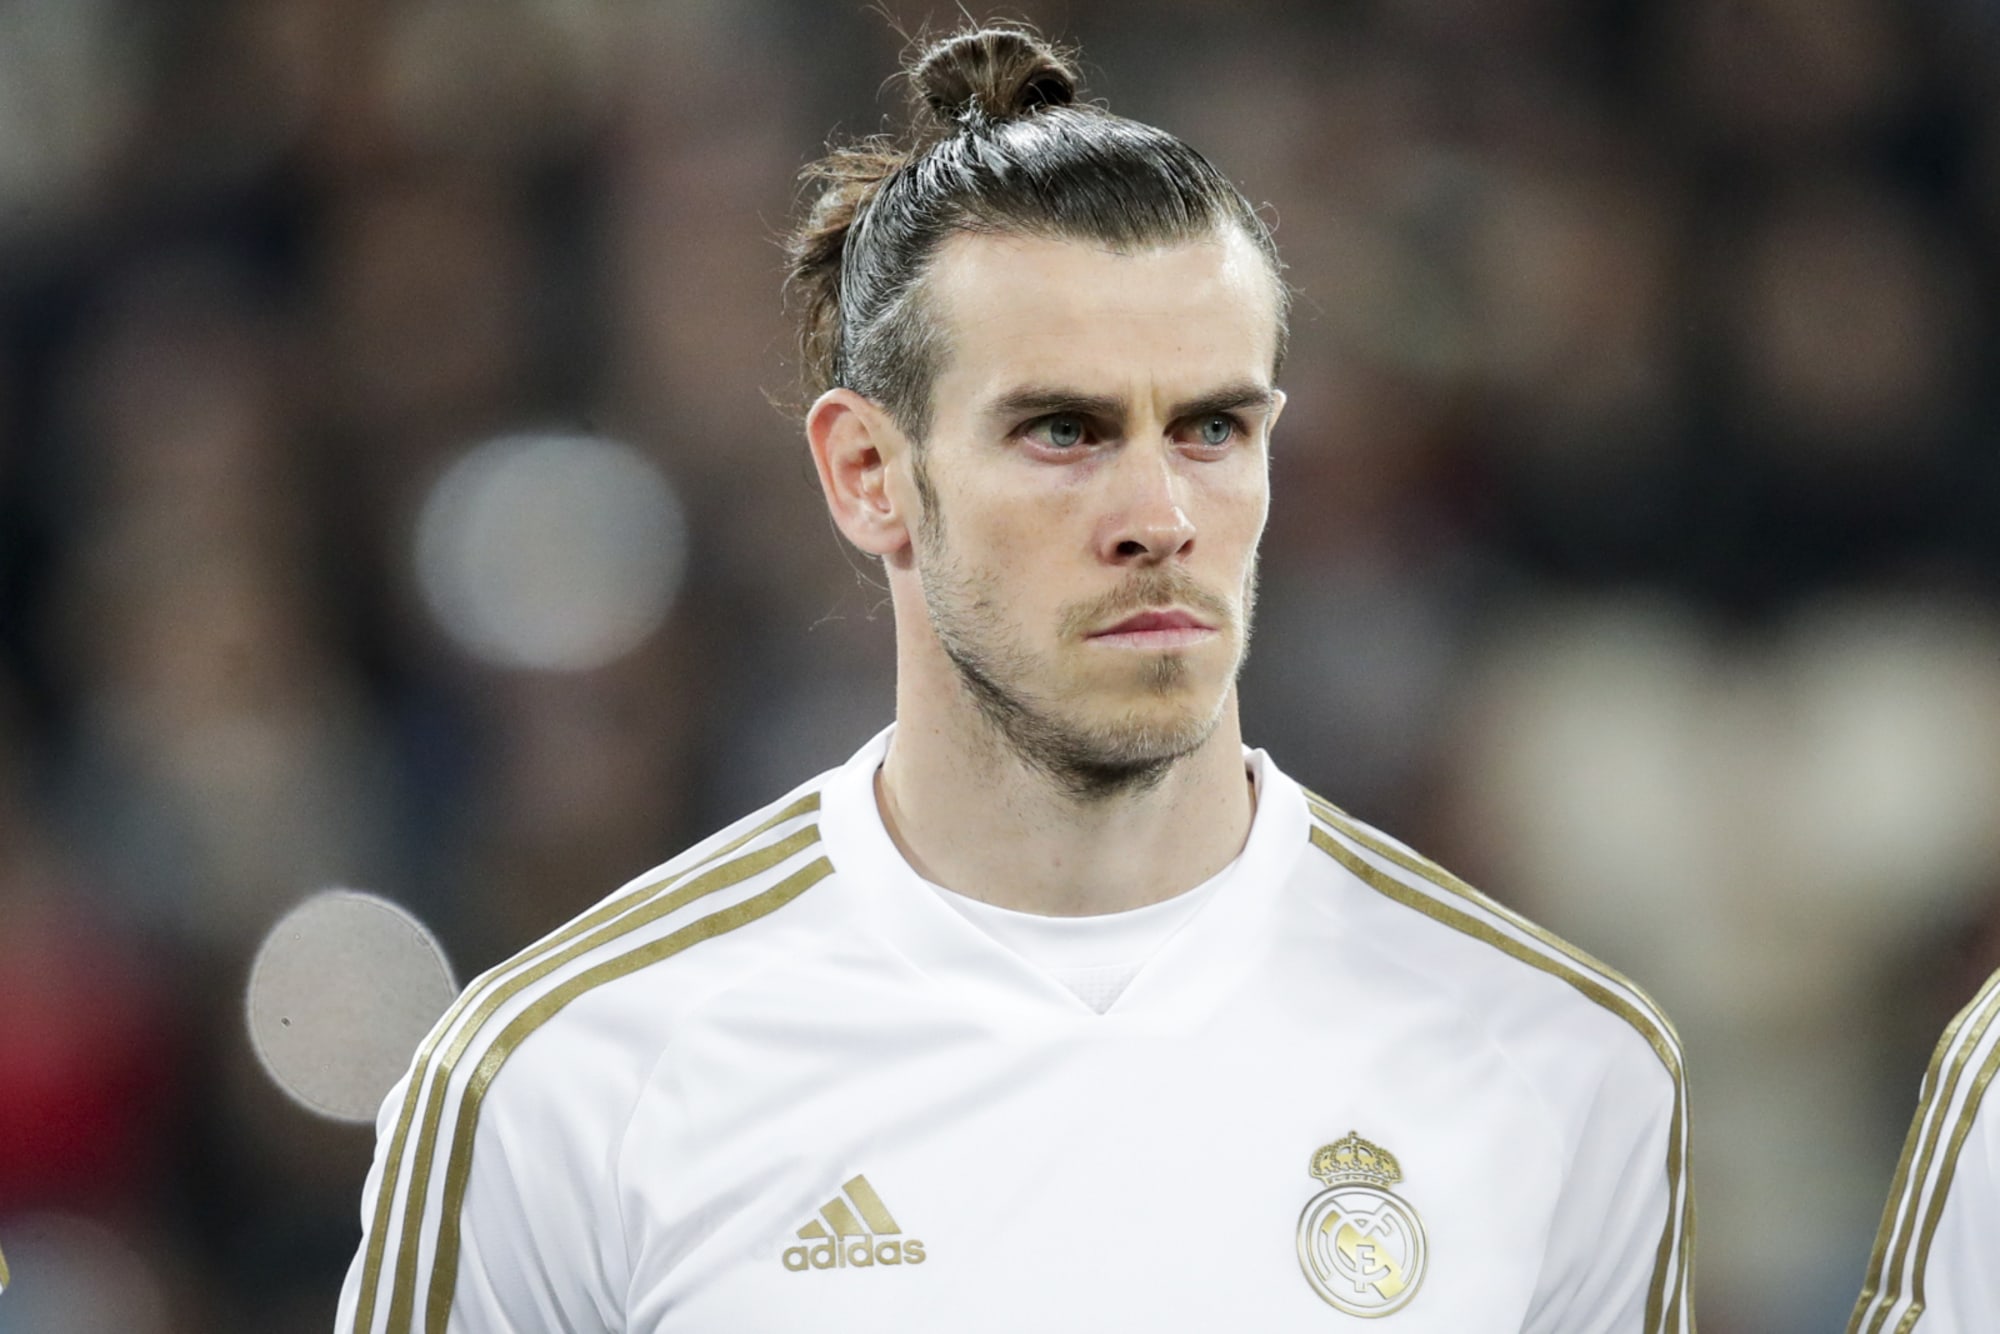 Gareth Bale will leave Real Madrid this summer. (Photo by David S. Bustamante/Soccrates/Getty Images)